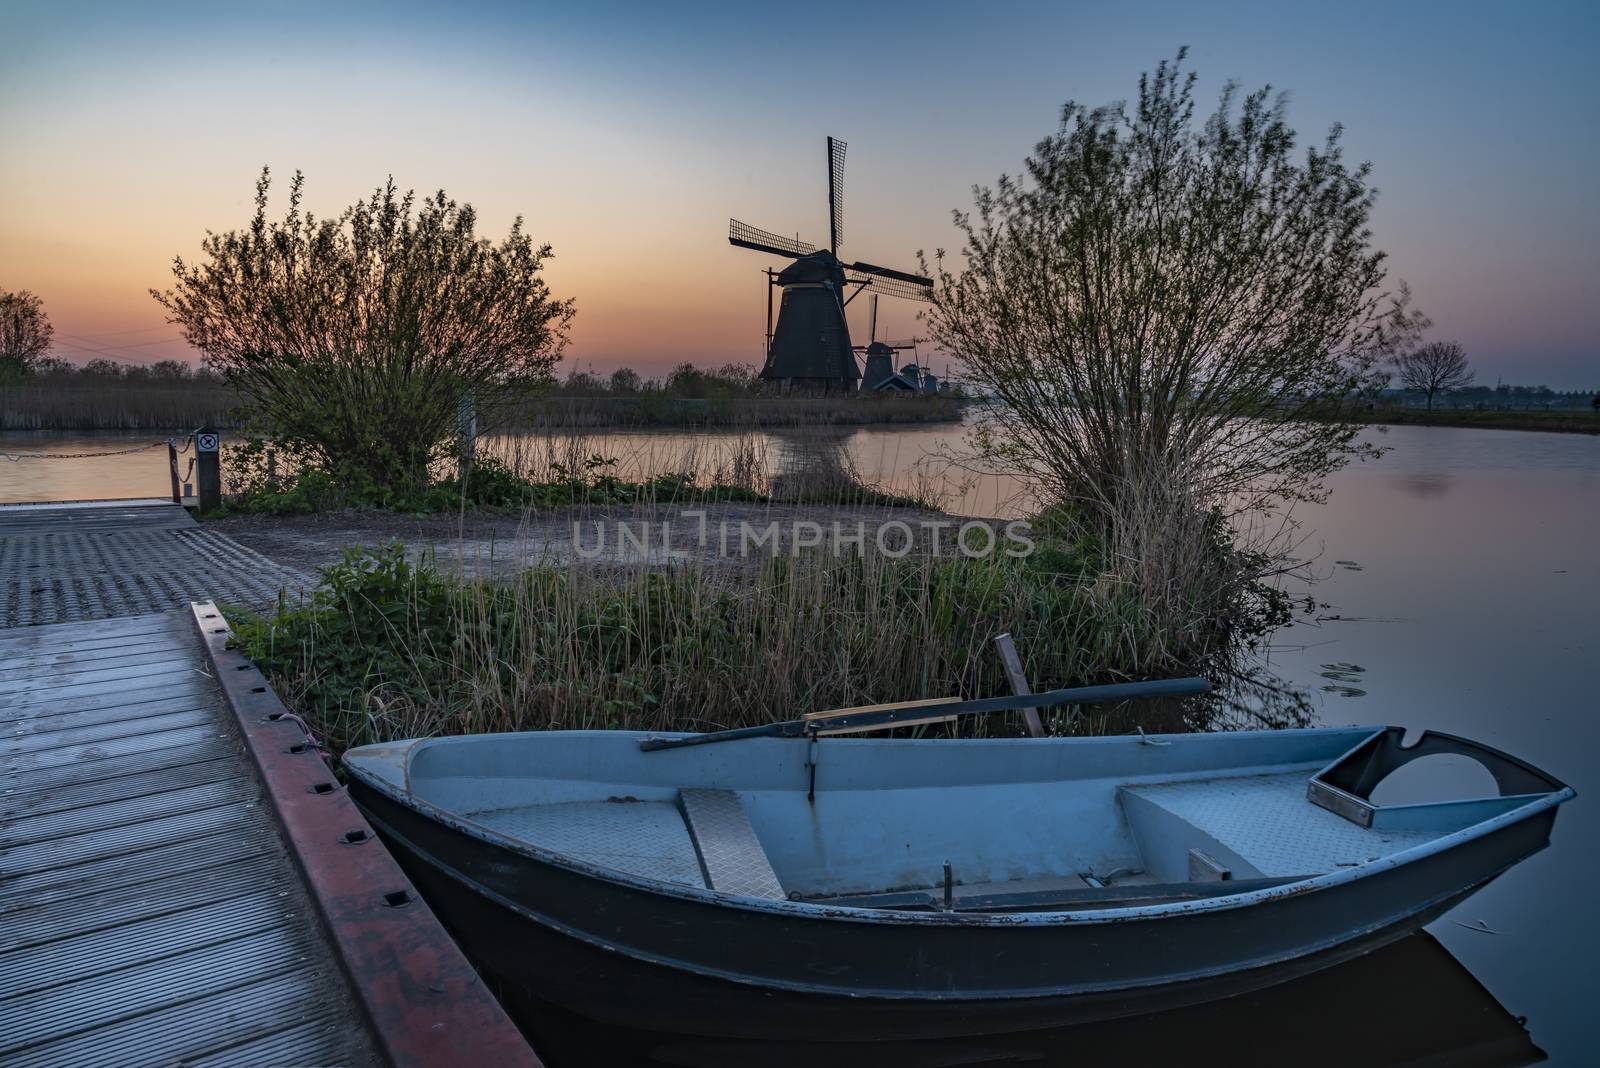 Safety boat parking at the bench of the kinderdijk canal at the golden hour sunrise